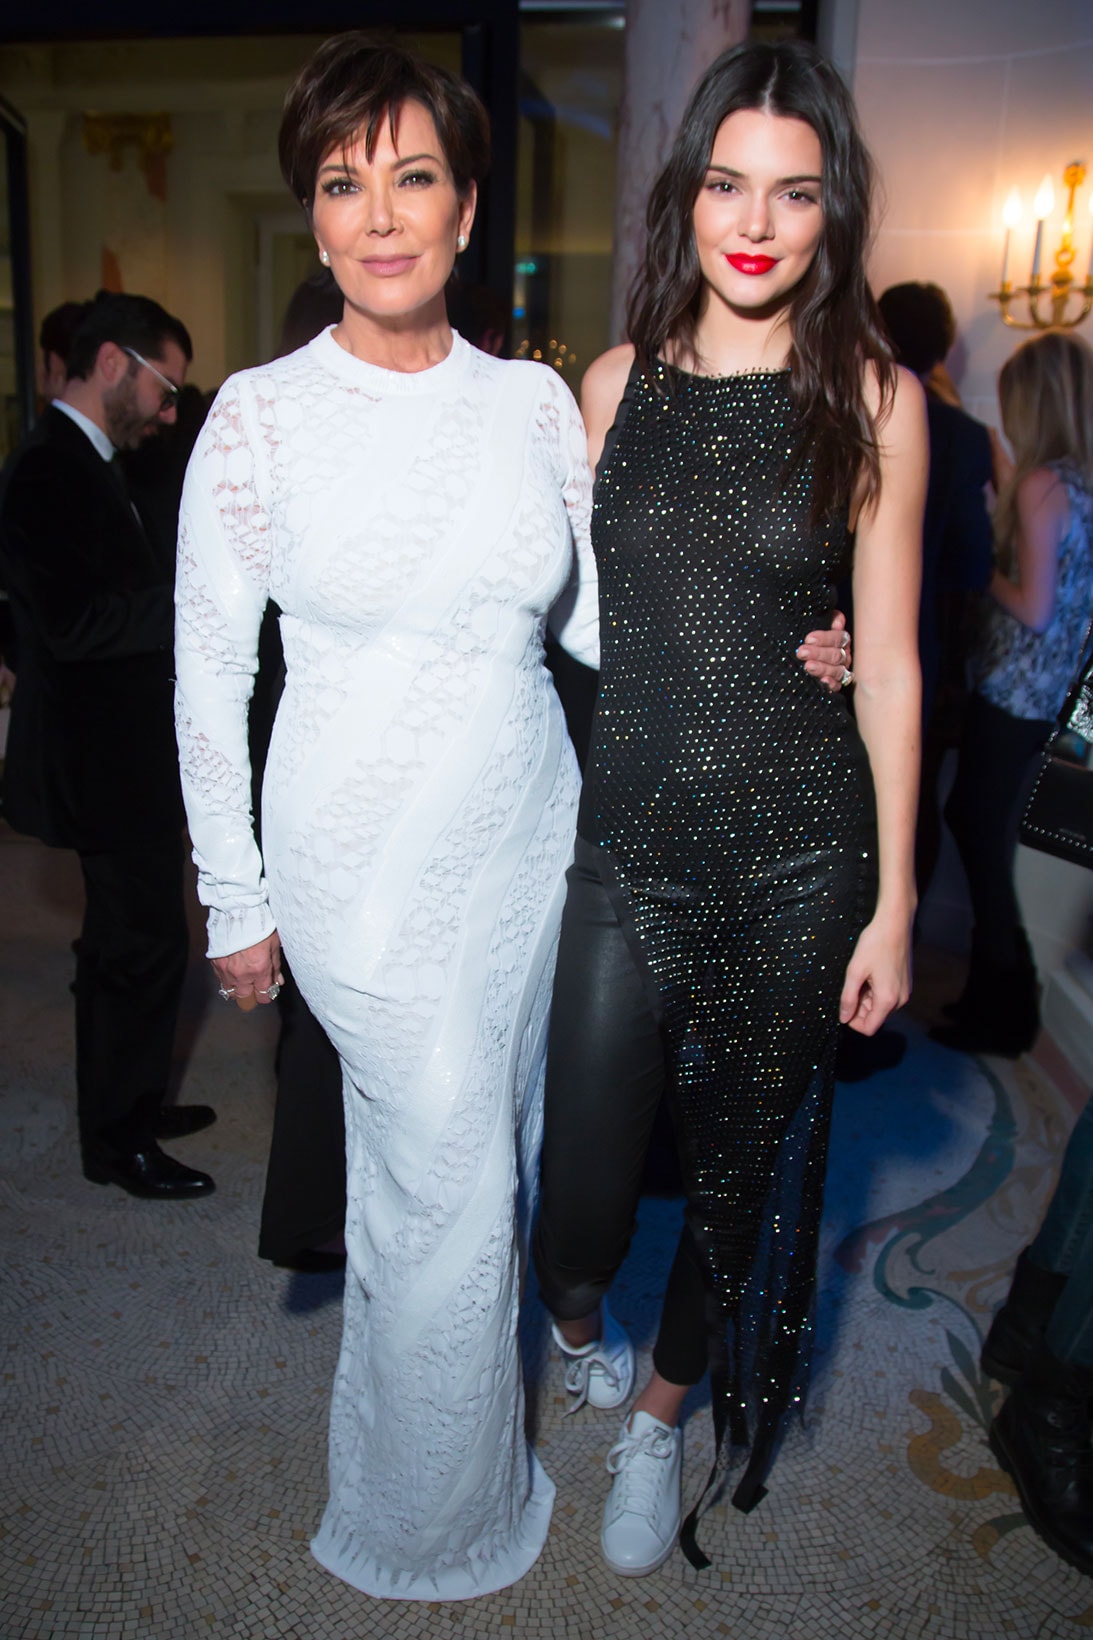 Kris Jenner Kendall Jenner Keeping Up With the Kardashians Model Reality Star